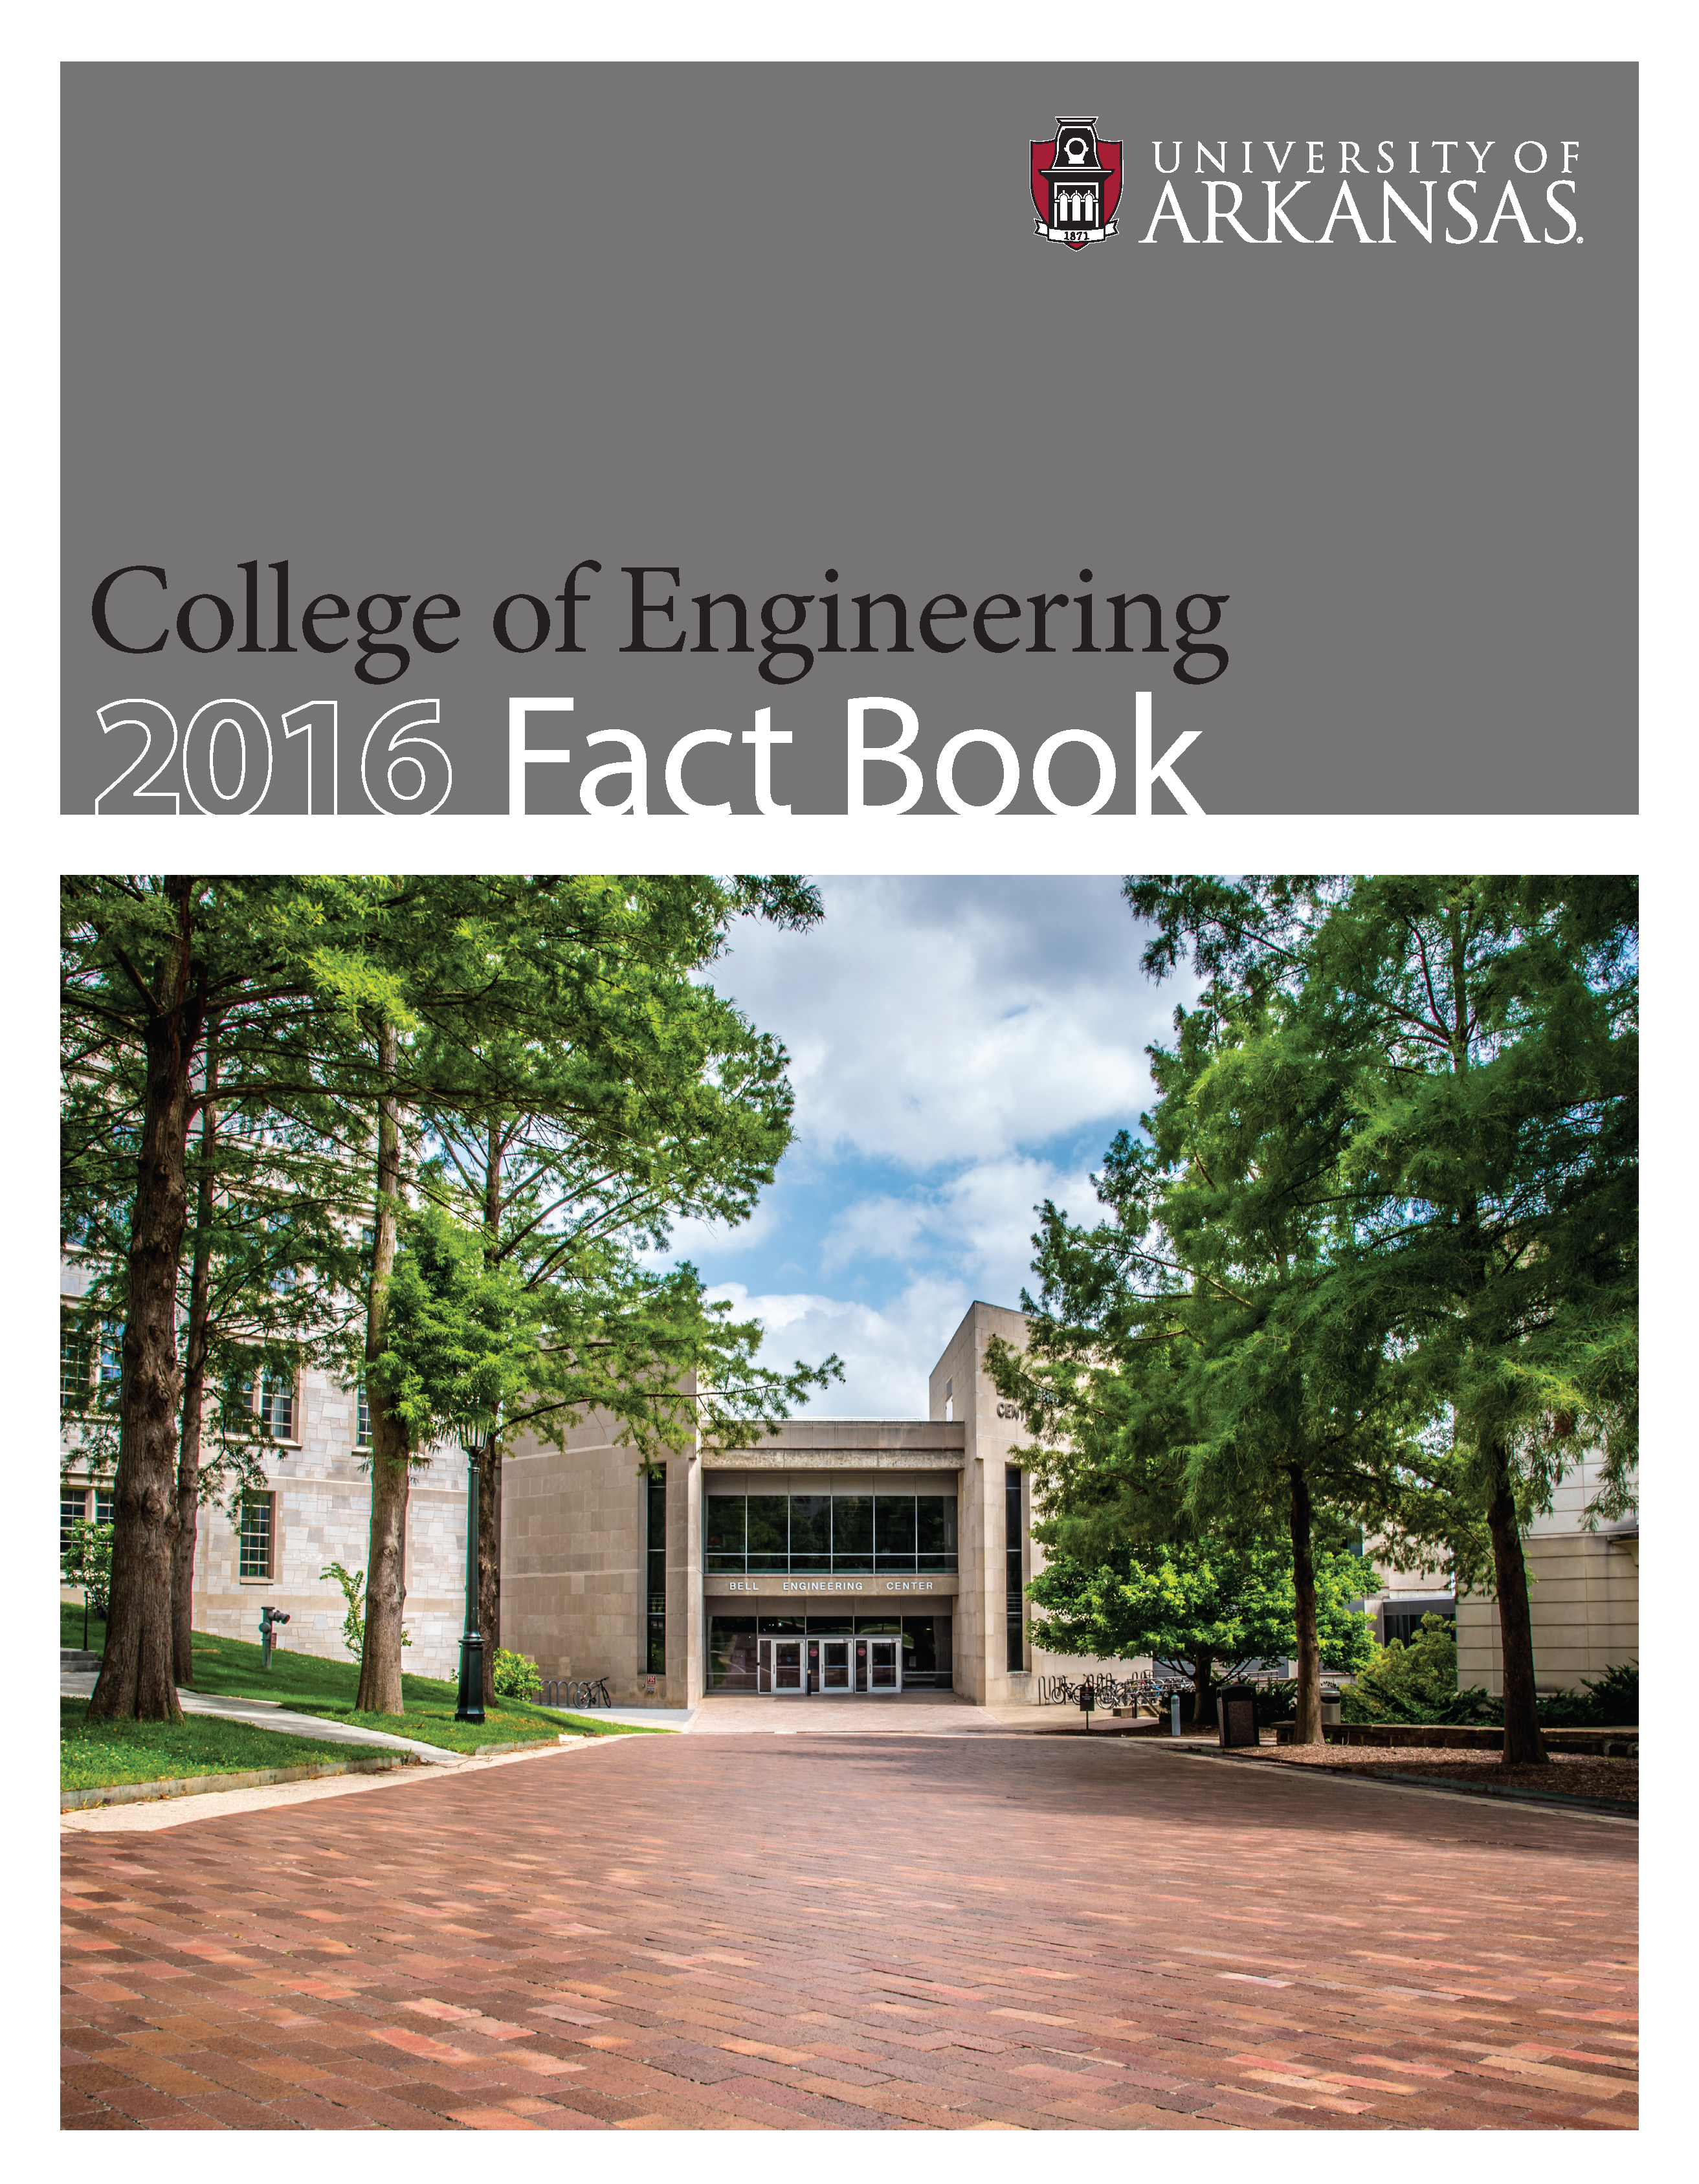 College of Engineering 2016 Fact Book